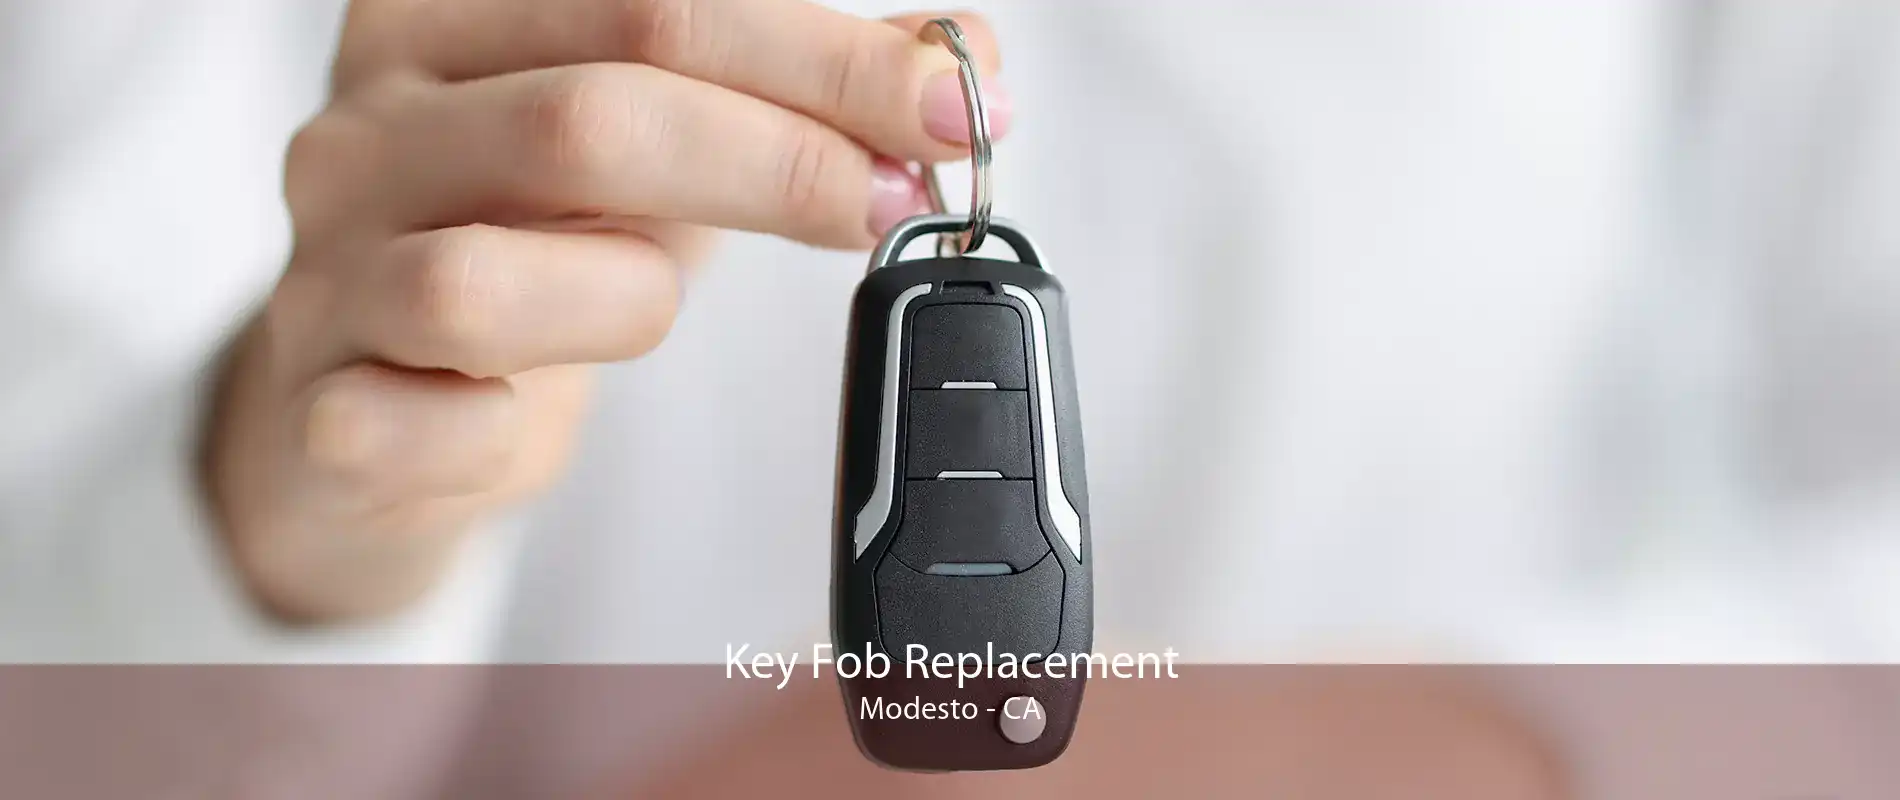 Key Fob Replacement Modesto - CA